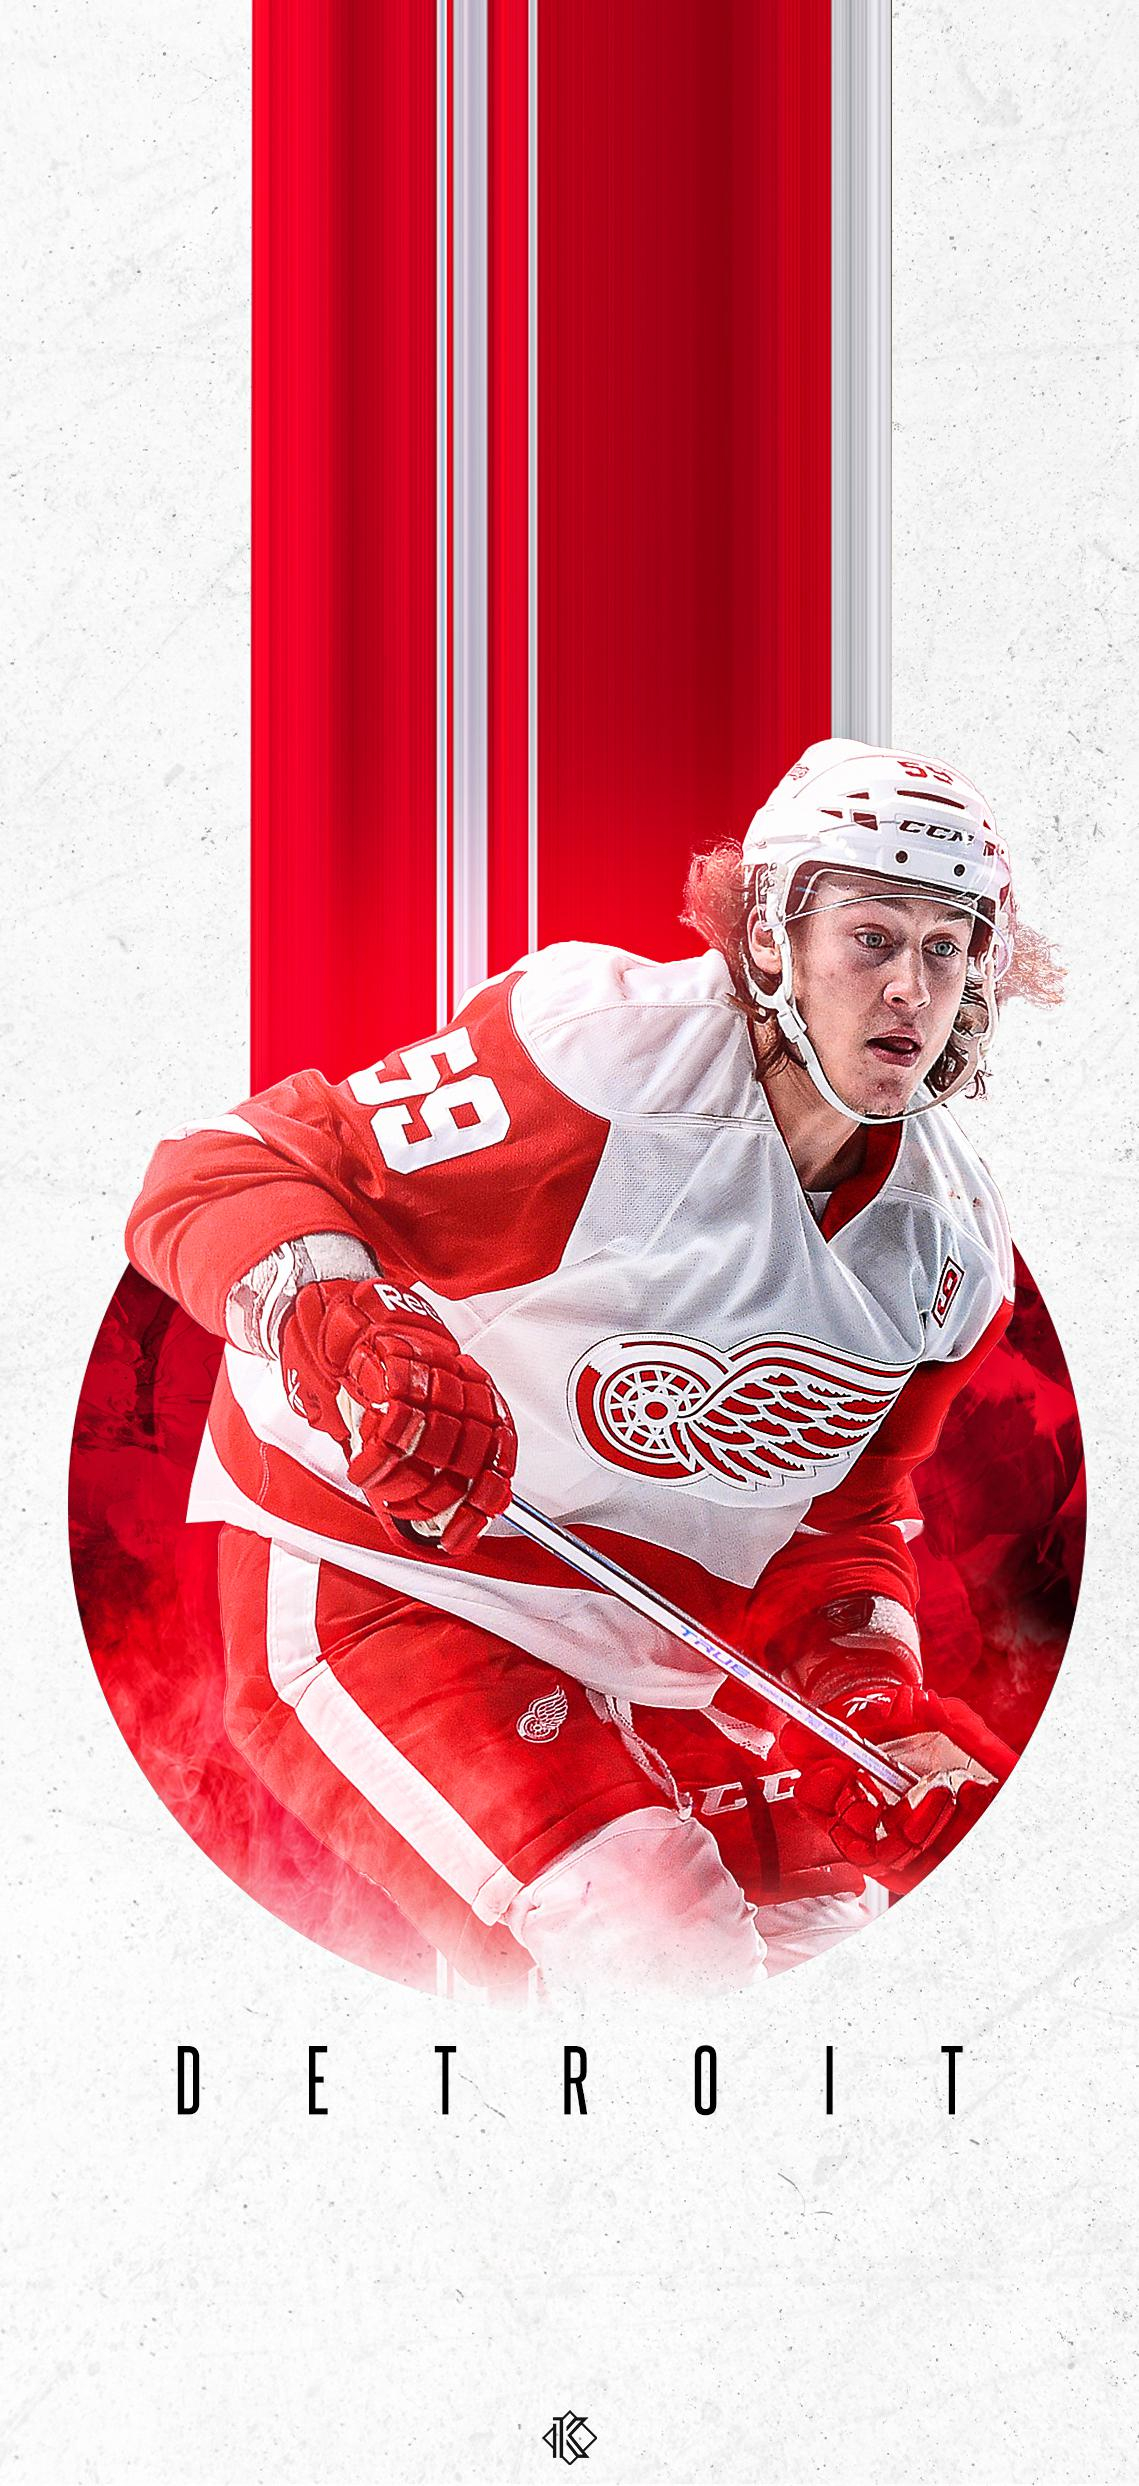 1139x2486 Made a Red Wings phone wallpaper Going through each team and doing one player per team in this style! Hope you enjoy! : r/GoodRisingTweets